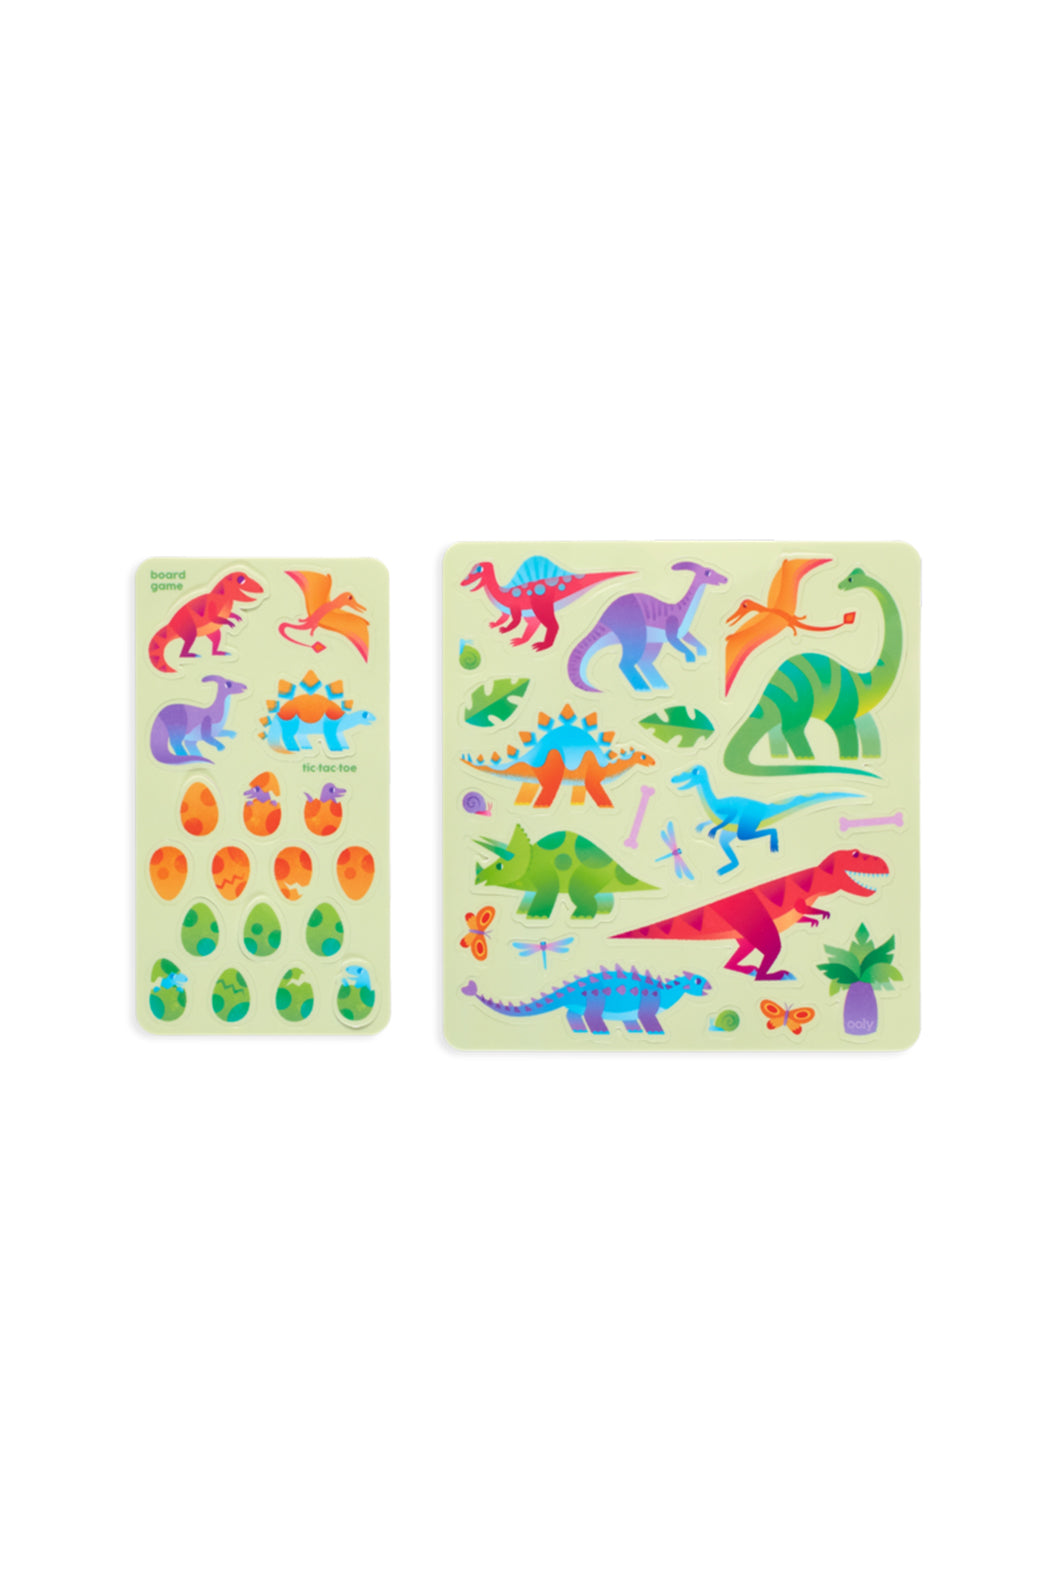 Ooly On-The-Go Play Again Reusable Sticker Fun: Daring Dinos